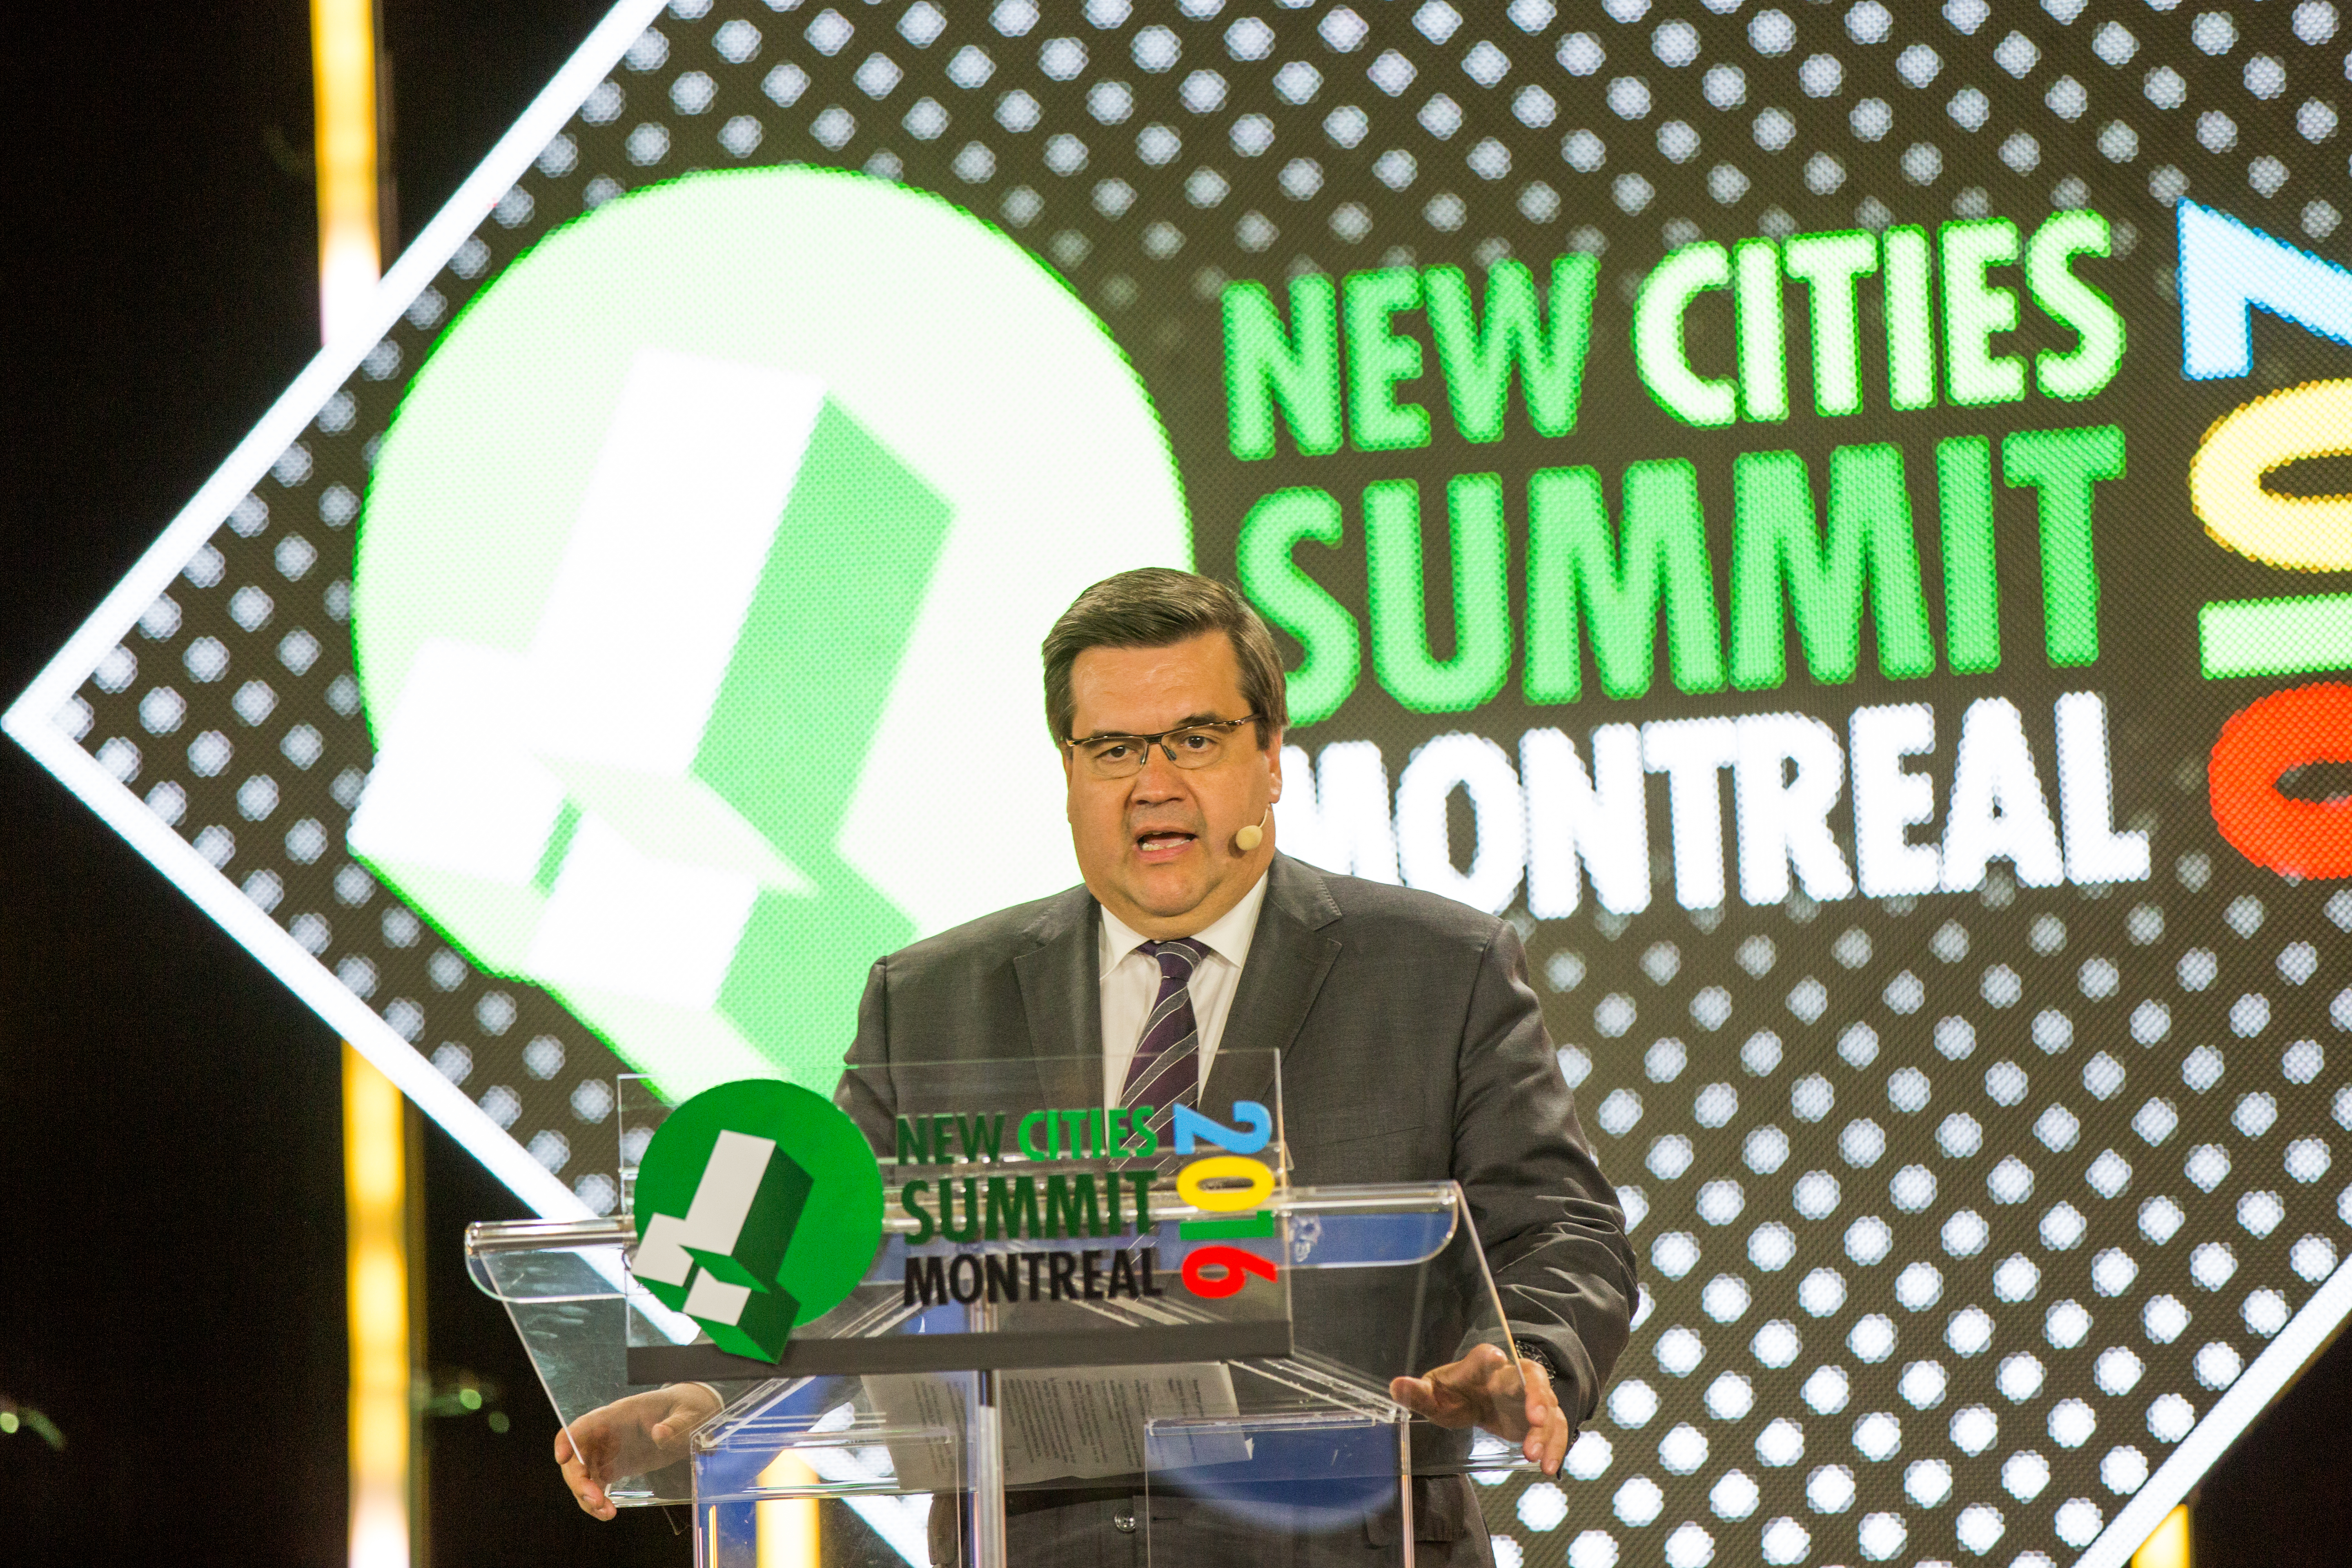 In June, Montreal hosted the New Cities Summit, where the event organiser, New Cities Foundation, now calls home